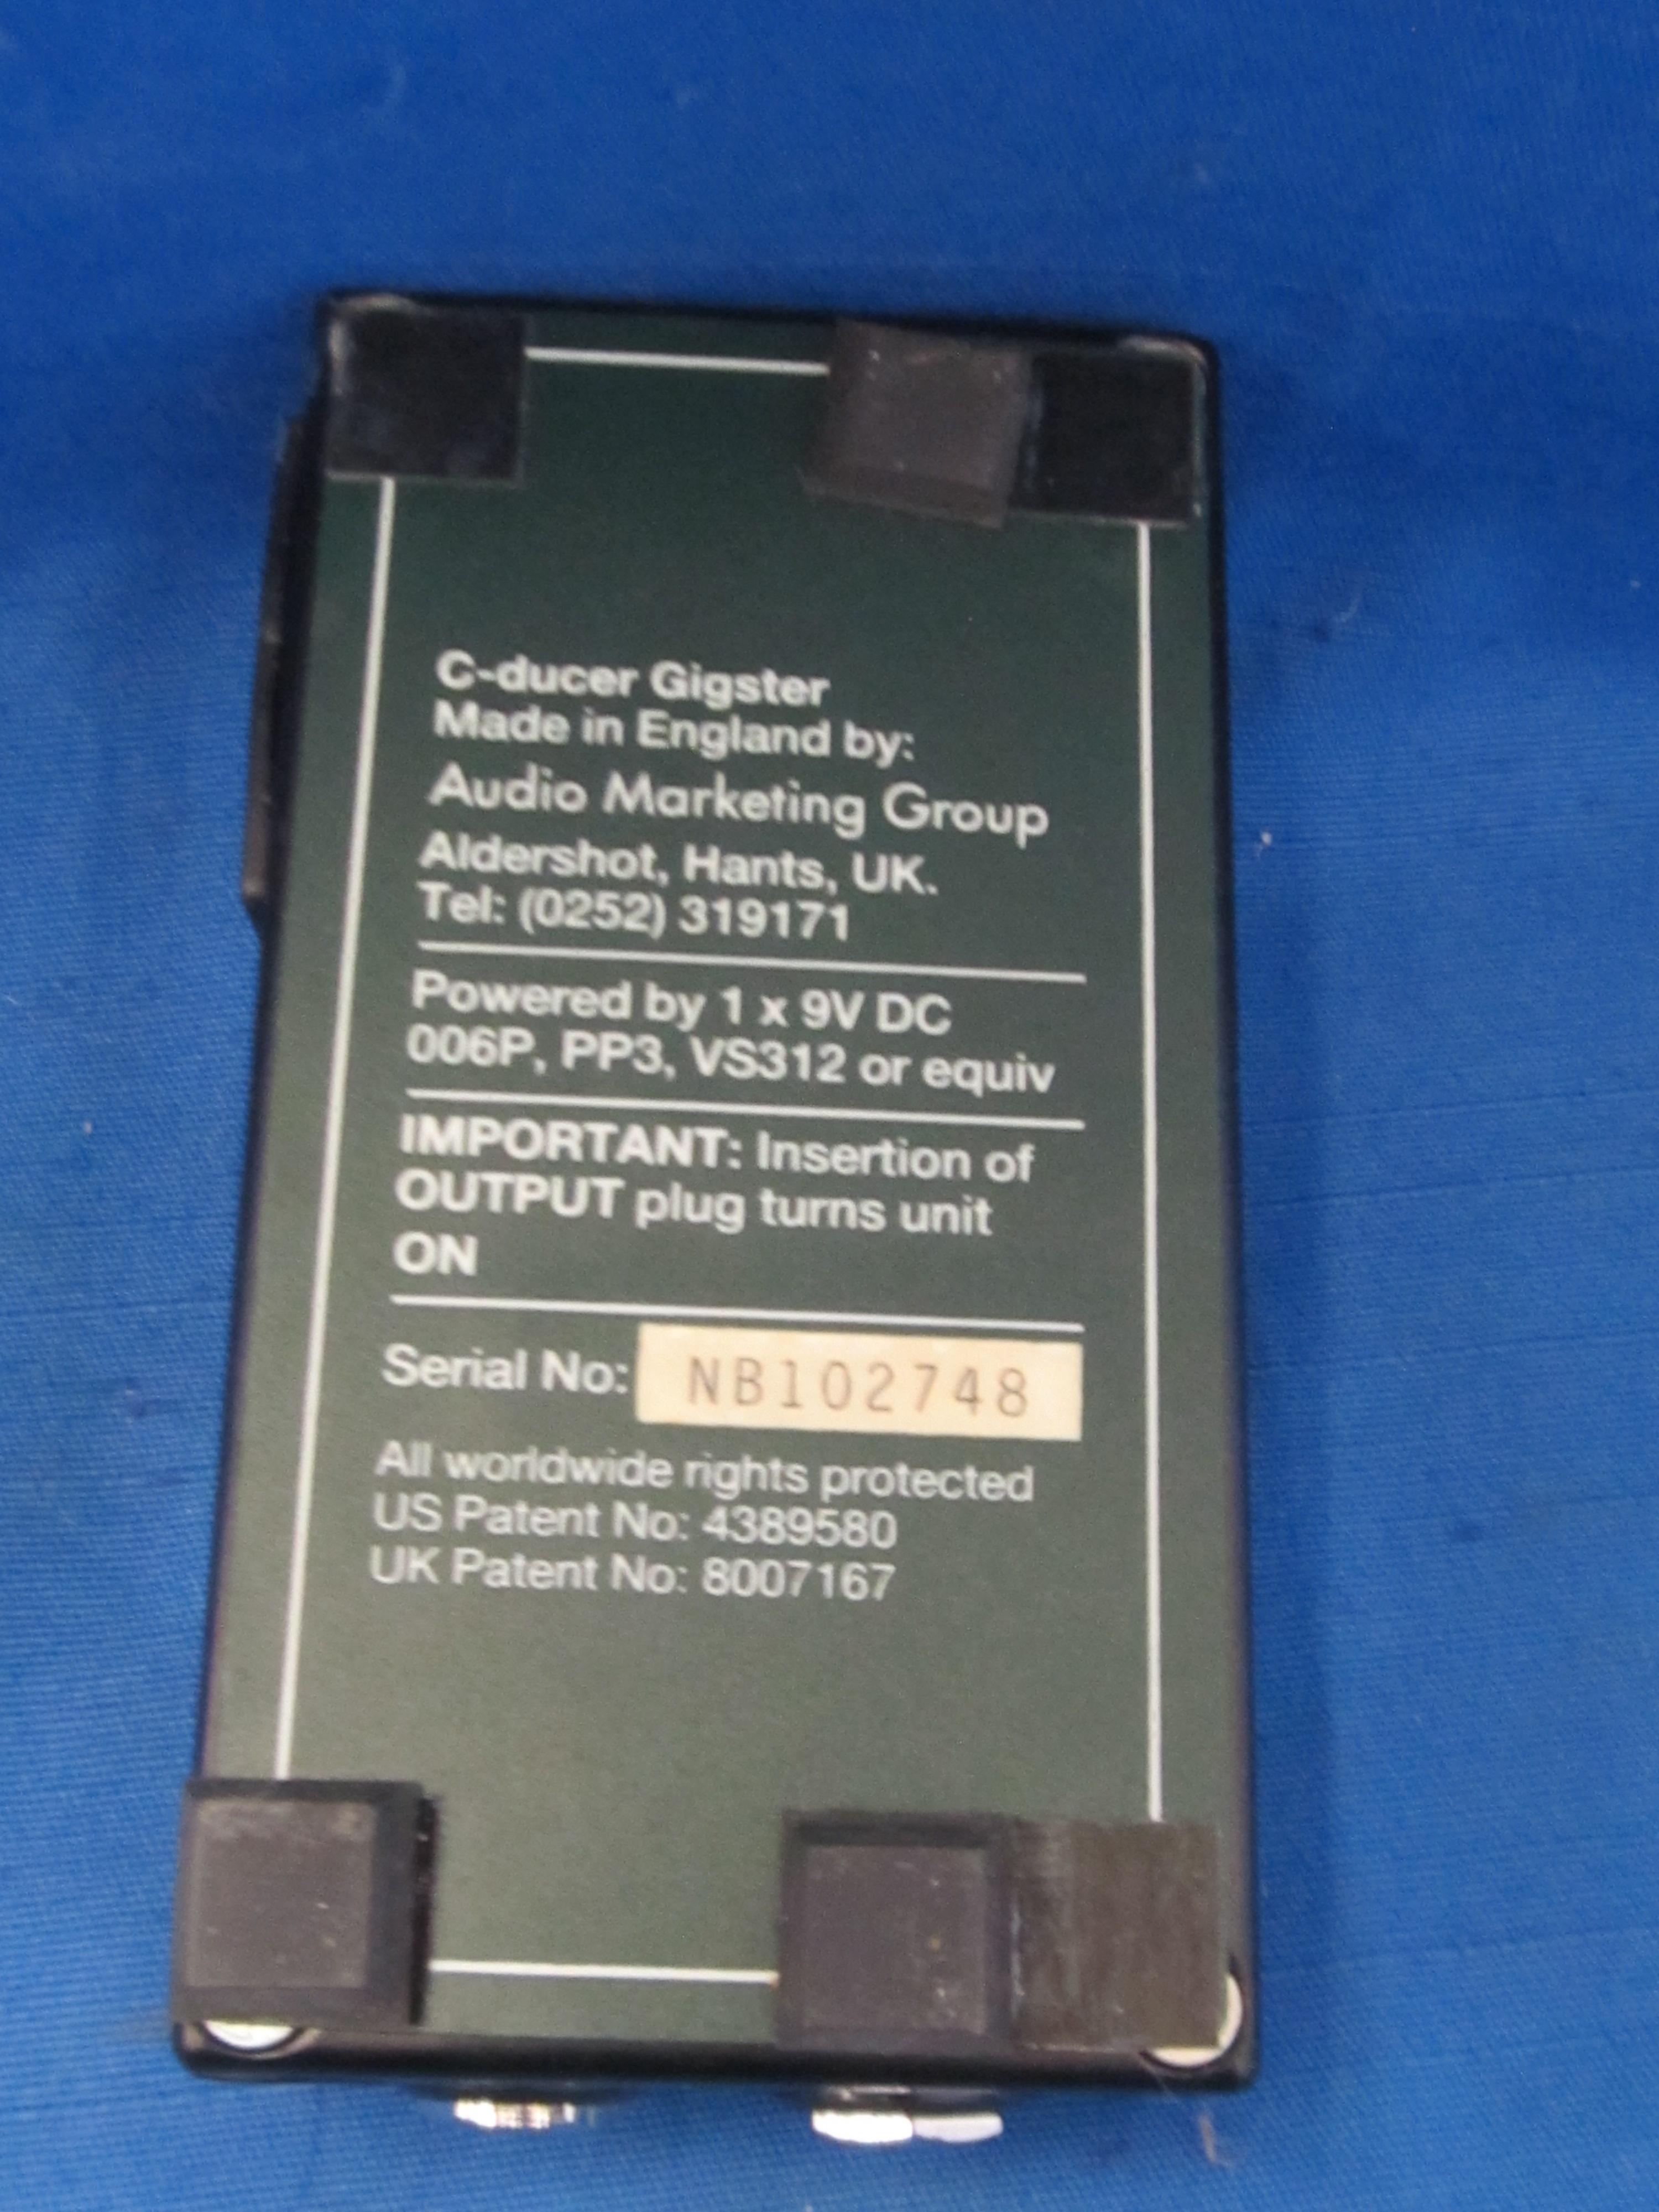 C-Ducer Gigster Vintage Quality As Pictured -